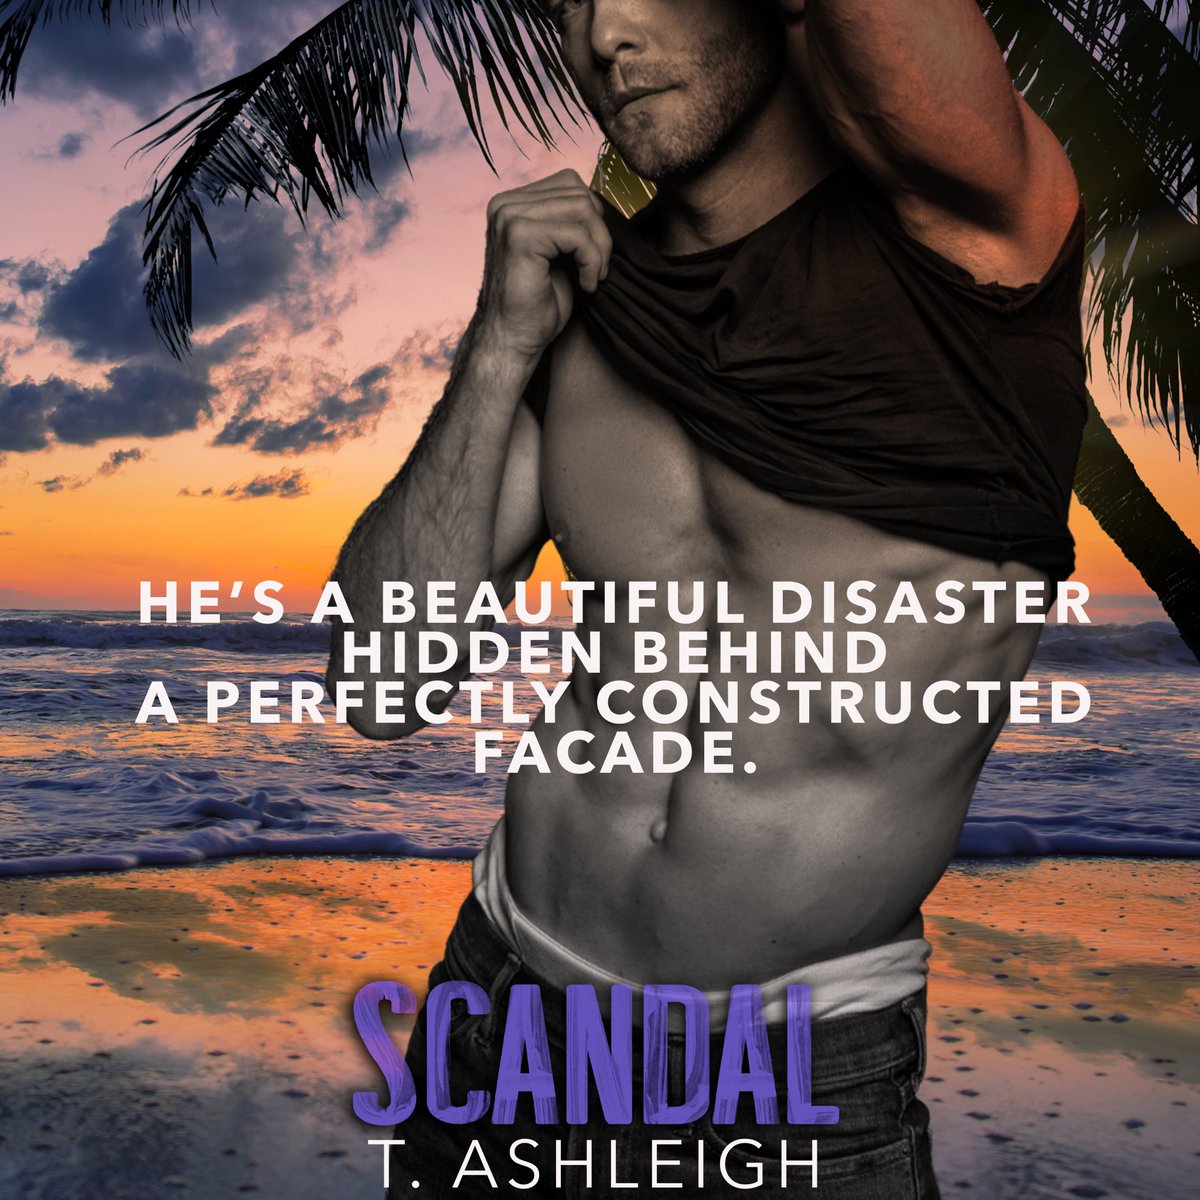 #ComingSoon Scandal, a fake relationship, MM romance by T. Ashleigh is coming 8/22.

Preorder & sign up for events here: geni.us/scandalevents

#MMRomance #FakeRelationship #SecretIdentity @Chaotic_Creativ